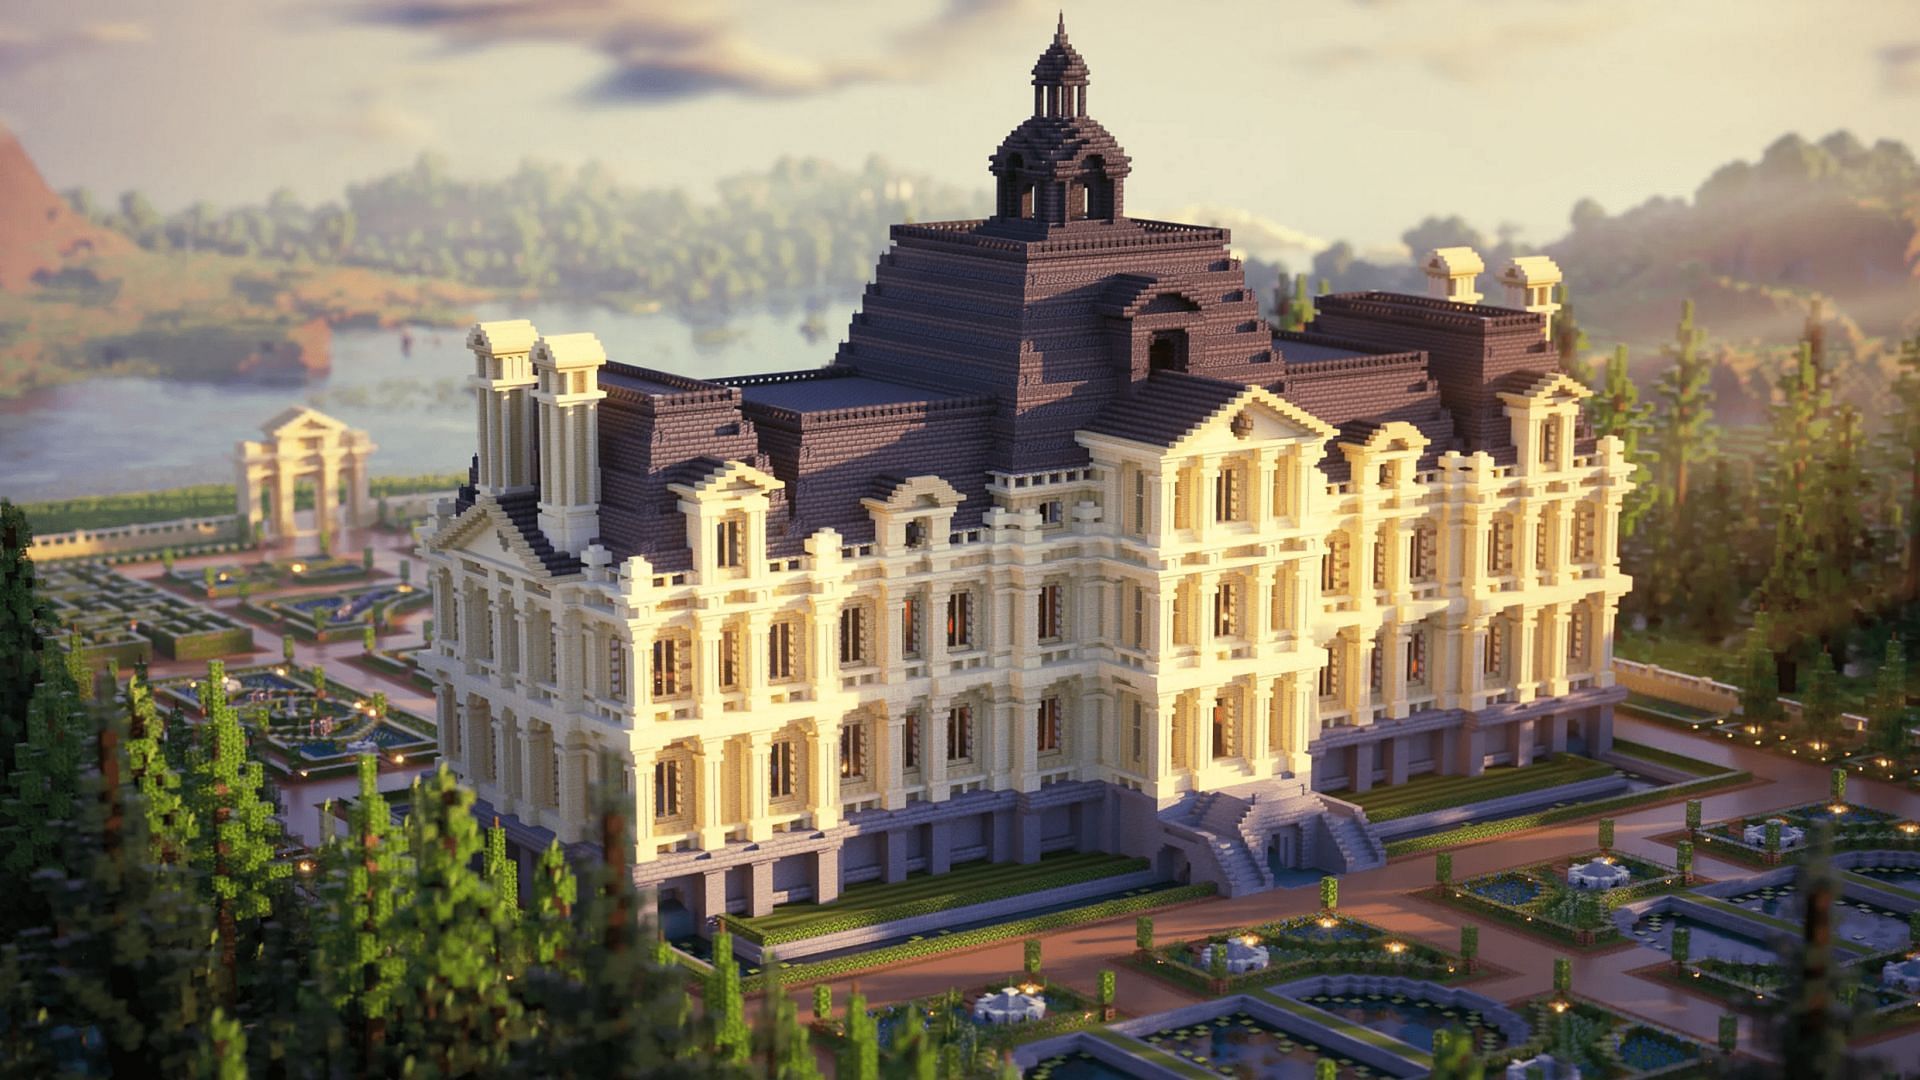 Few Minecraft mansions can match the splendor of this magnificent chateau (Image via Kaizens87/Reddit)